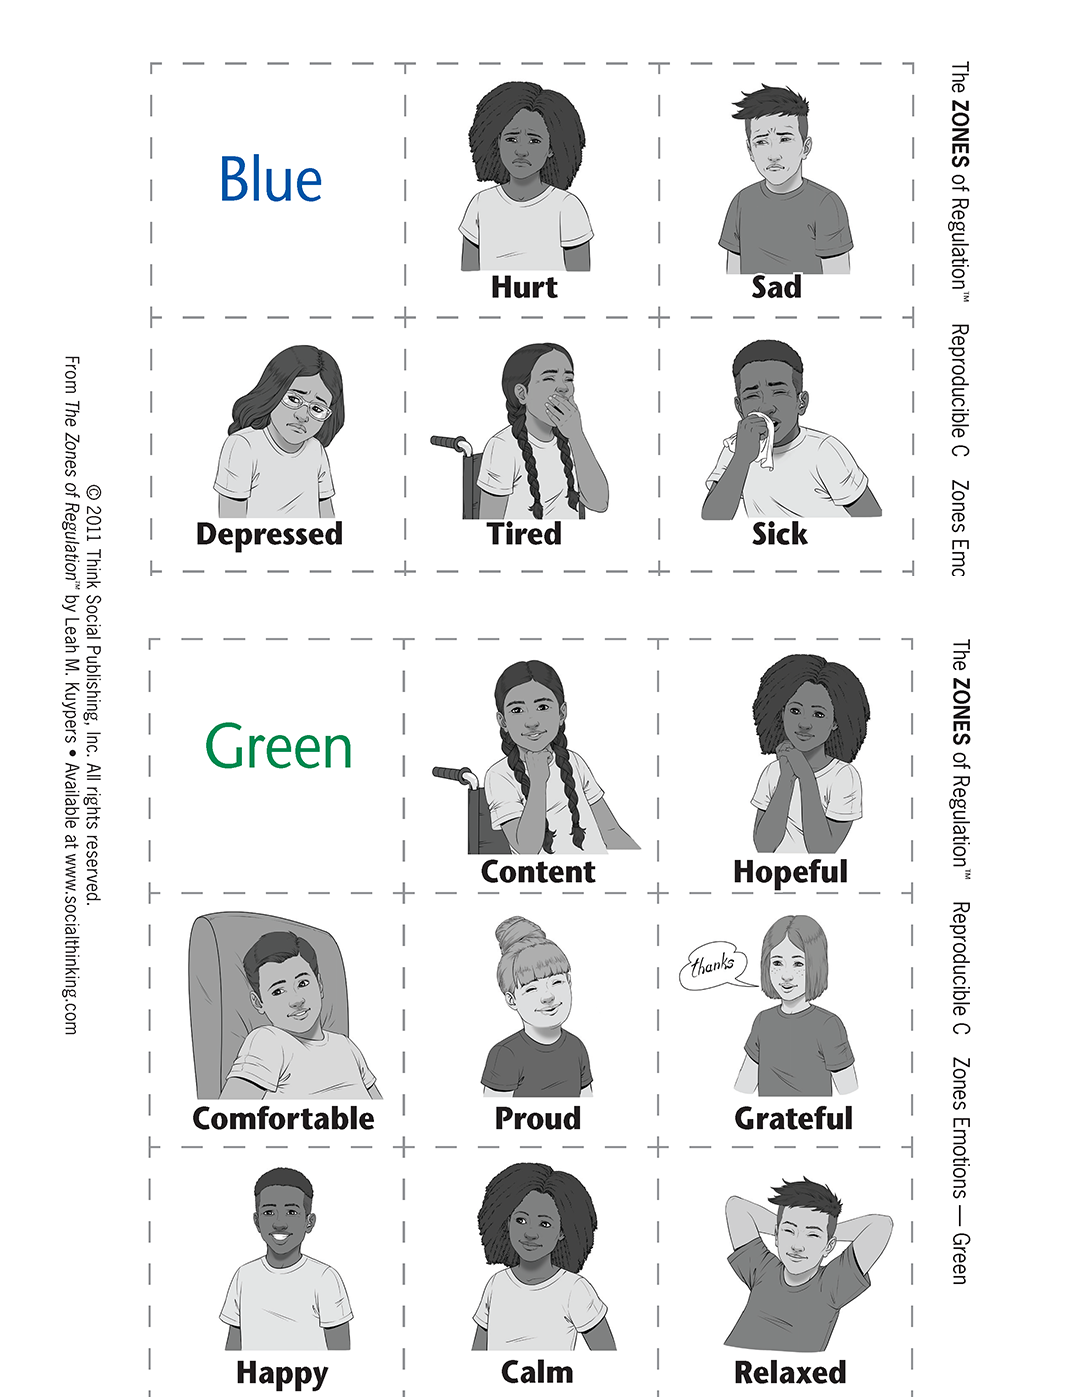 Zones Reproducible C Green and Blue Zone